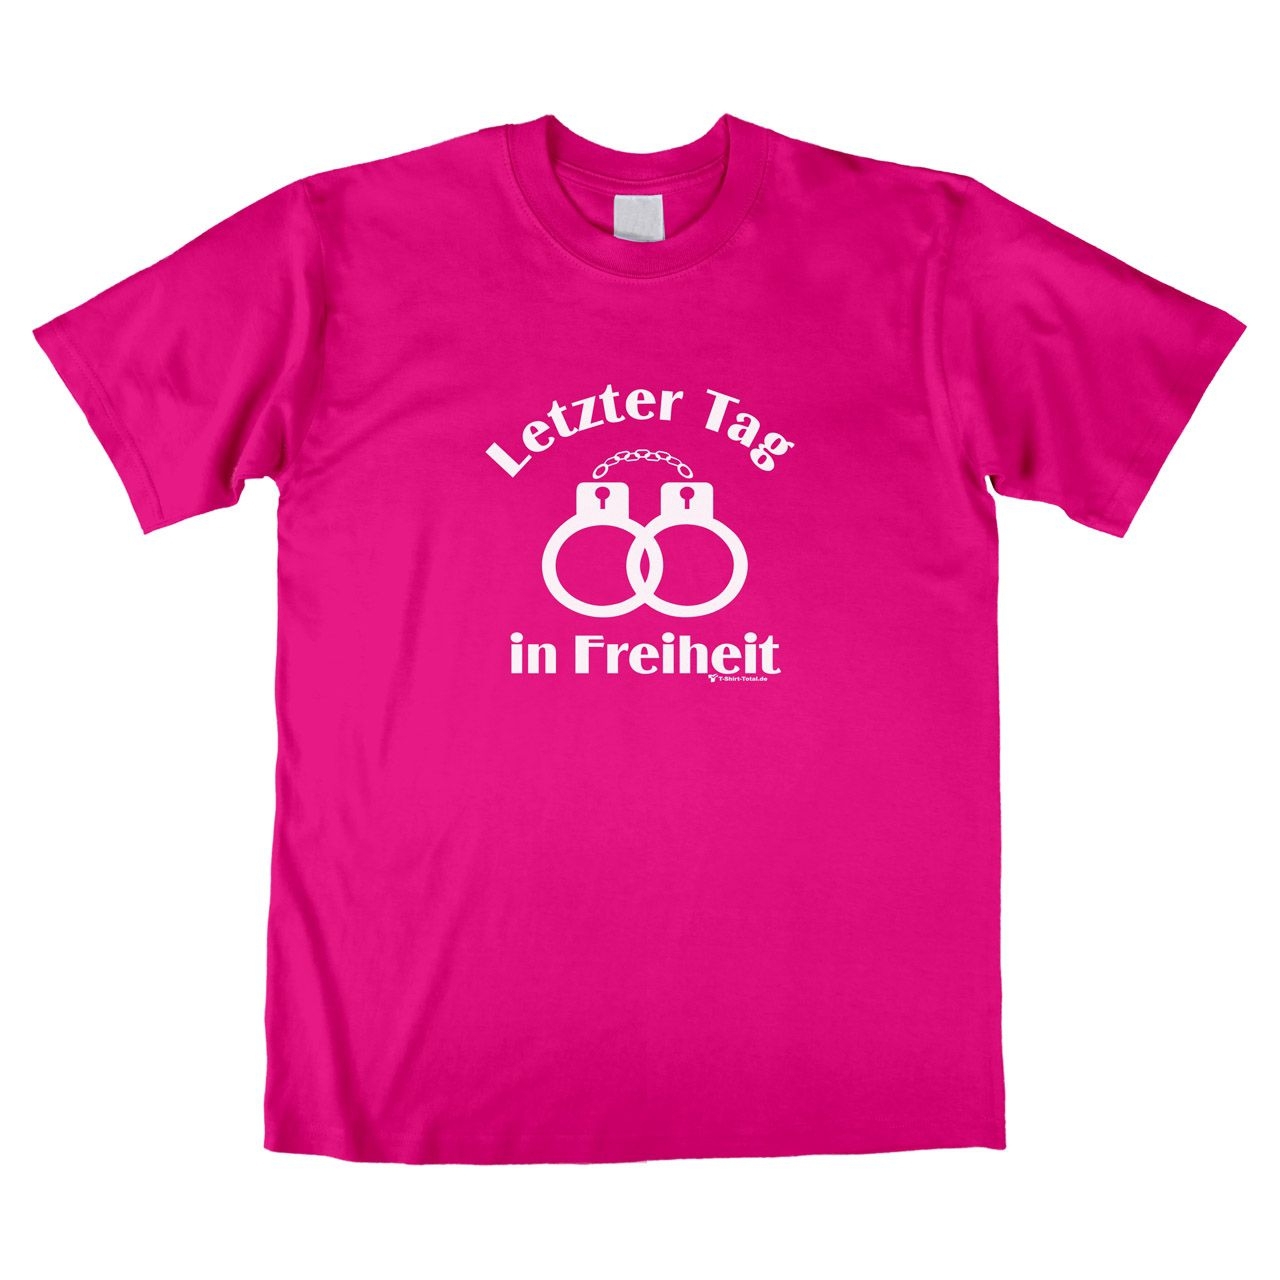 Letzter Tag in Freiheit Unisex T-Shirt pink Extra Large